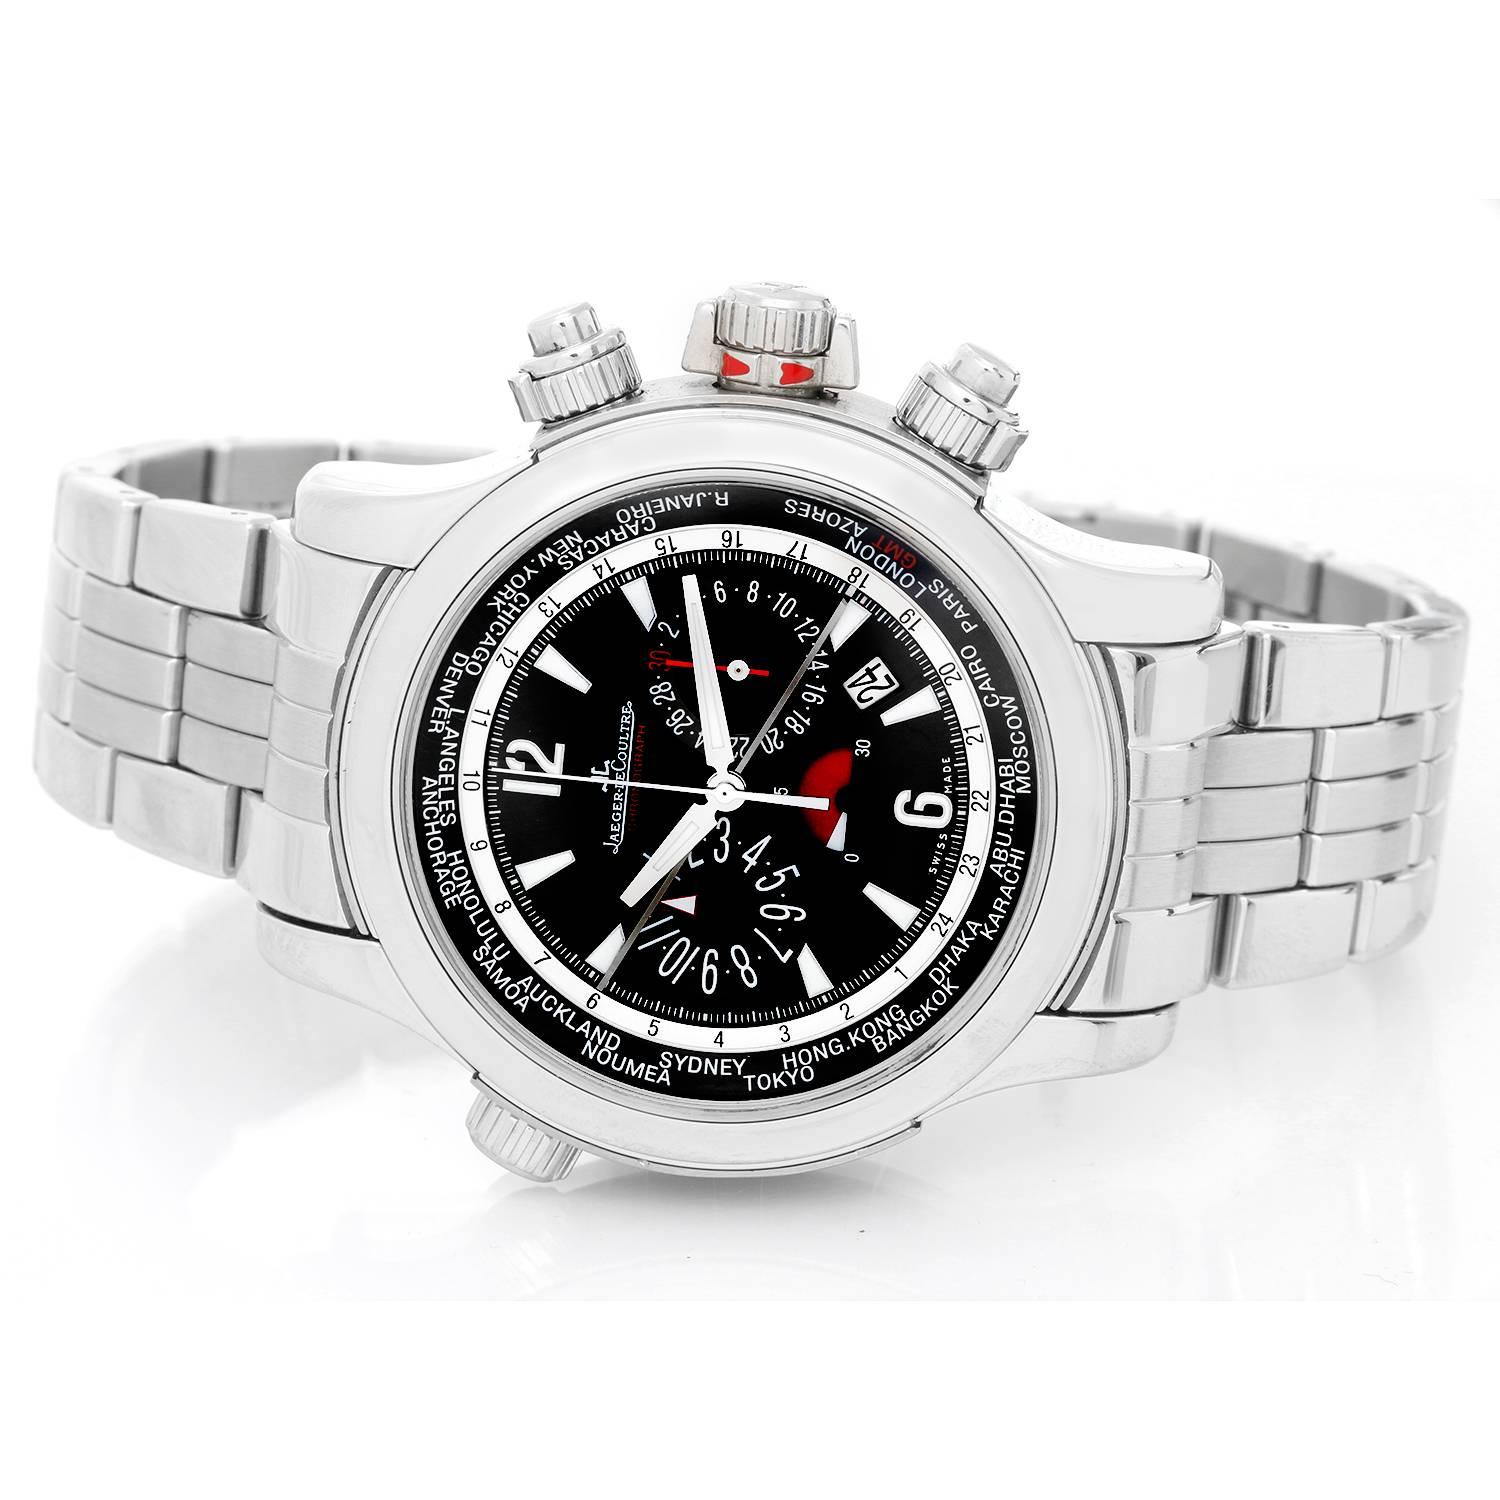 Jaeger LeCoultre Master Compressor Extreme World Time Chronograph 176.81.70 Men's Watch -  Automatic winding chronograph. Patented shock absorbing movement withstands even the most extreme uses. Stainless steel case  (46mm diameter). Black dial with